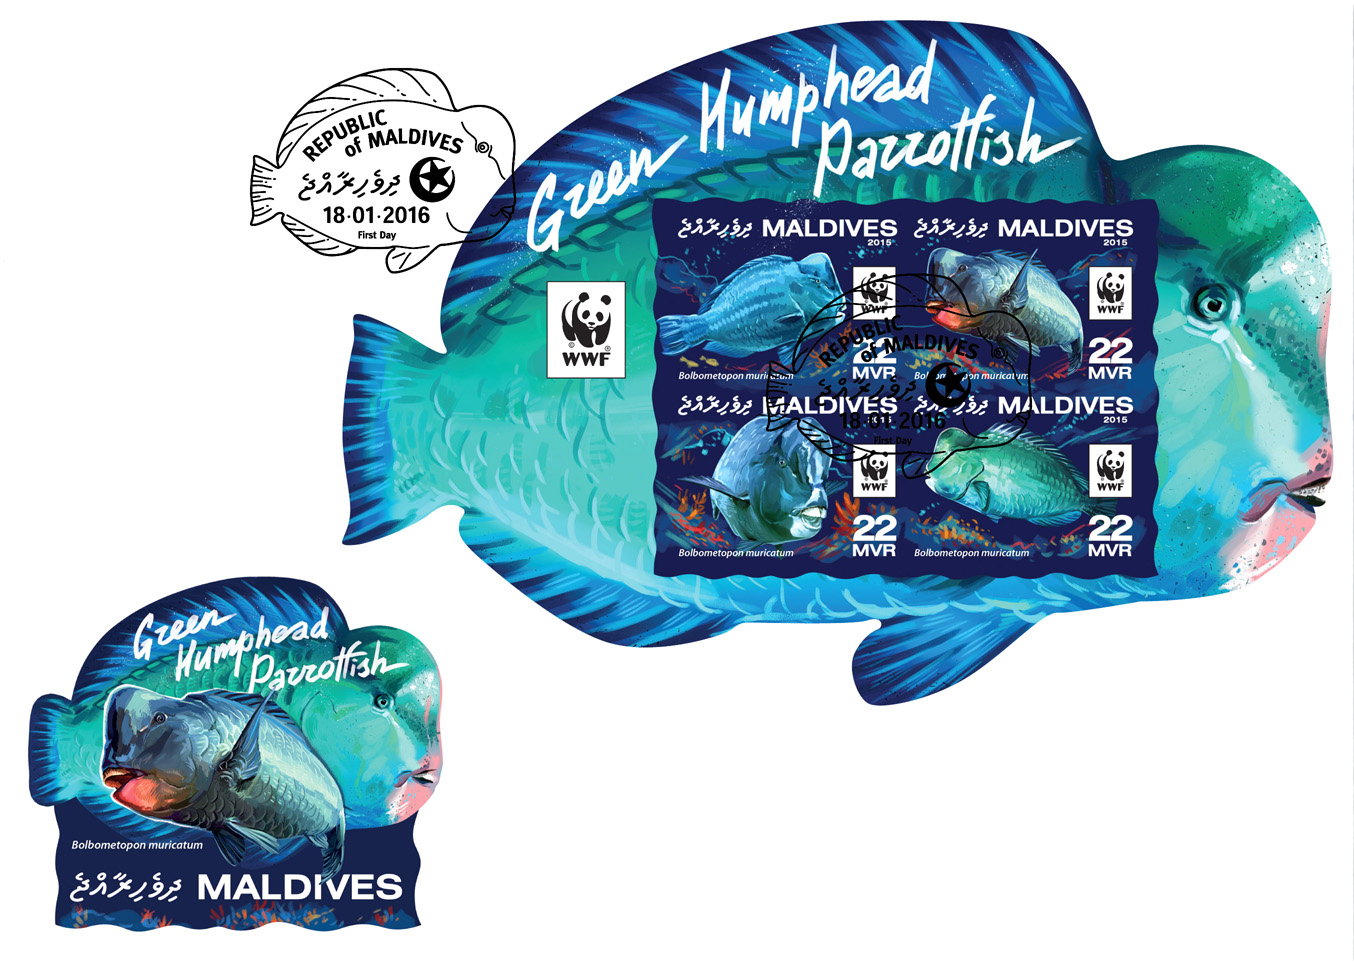 WWF – Parrotfish (FDC imperf.) - Issue of Maldives postage stamps